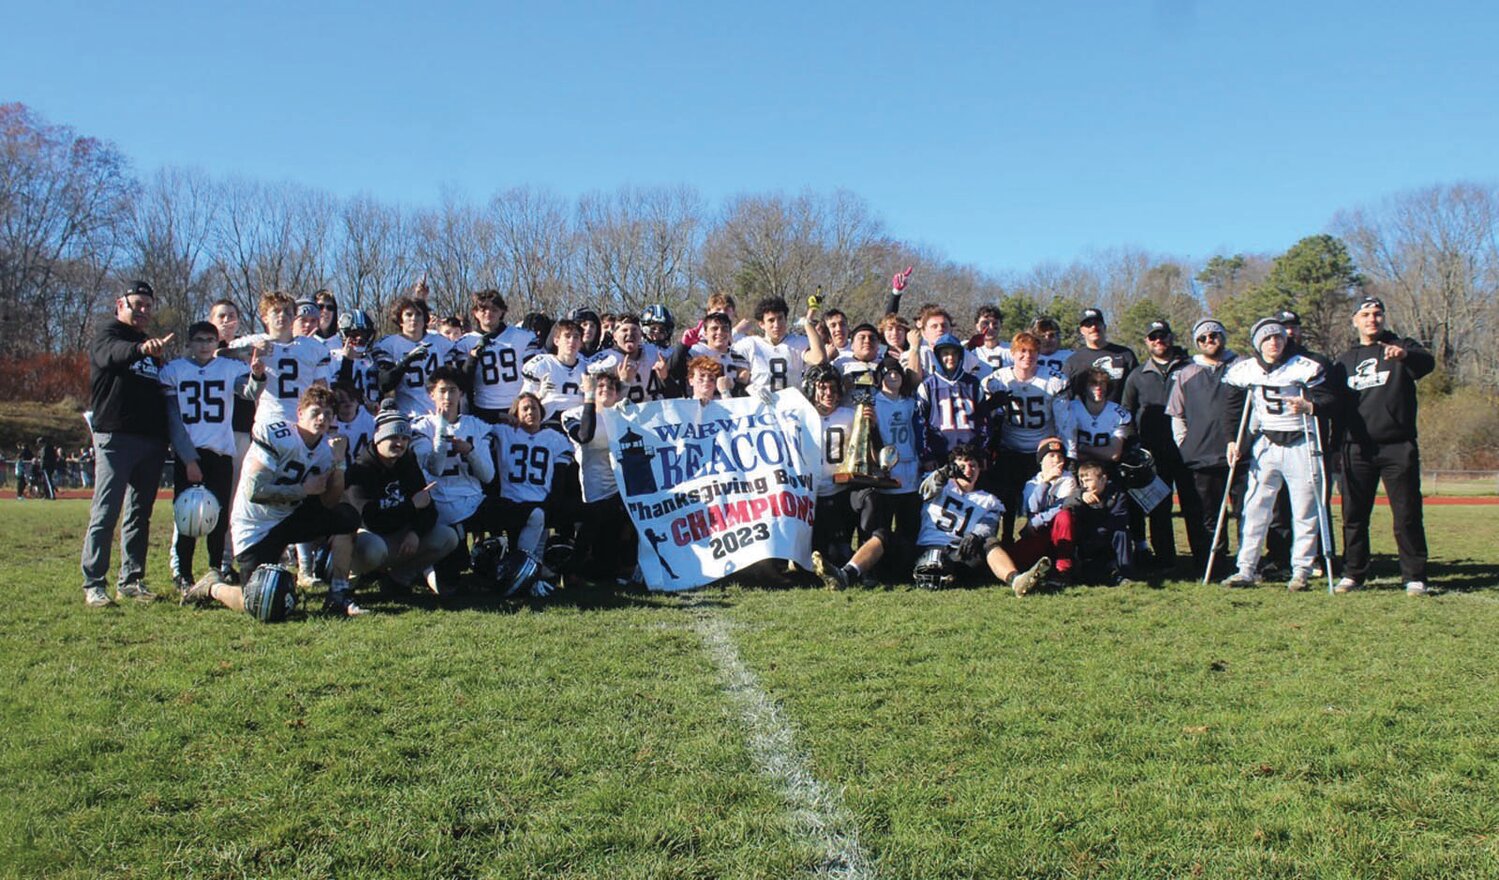 THE BEACON BOWL STAYS: The Pilgrim football team after winning the Thanksgiving Beacon Bowl. (Photos by Alex Sponseller)